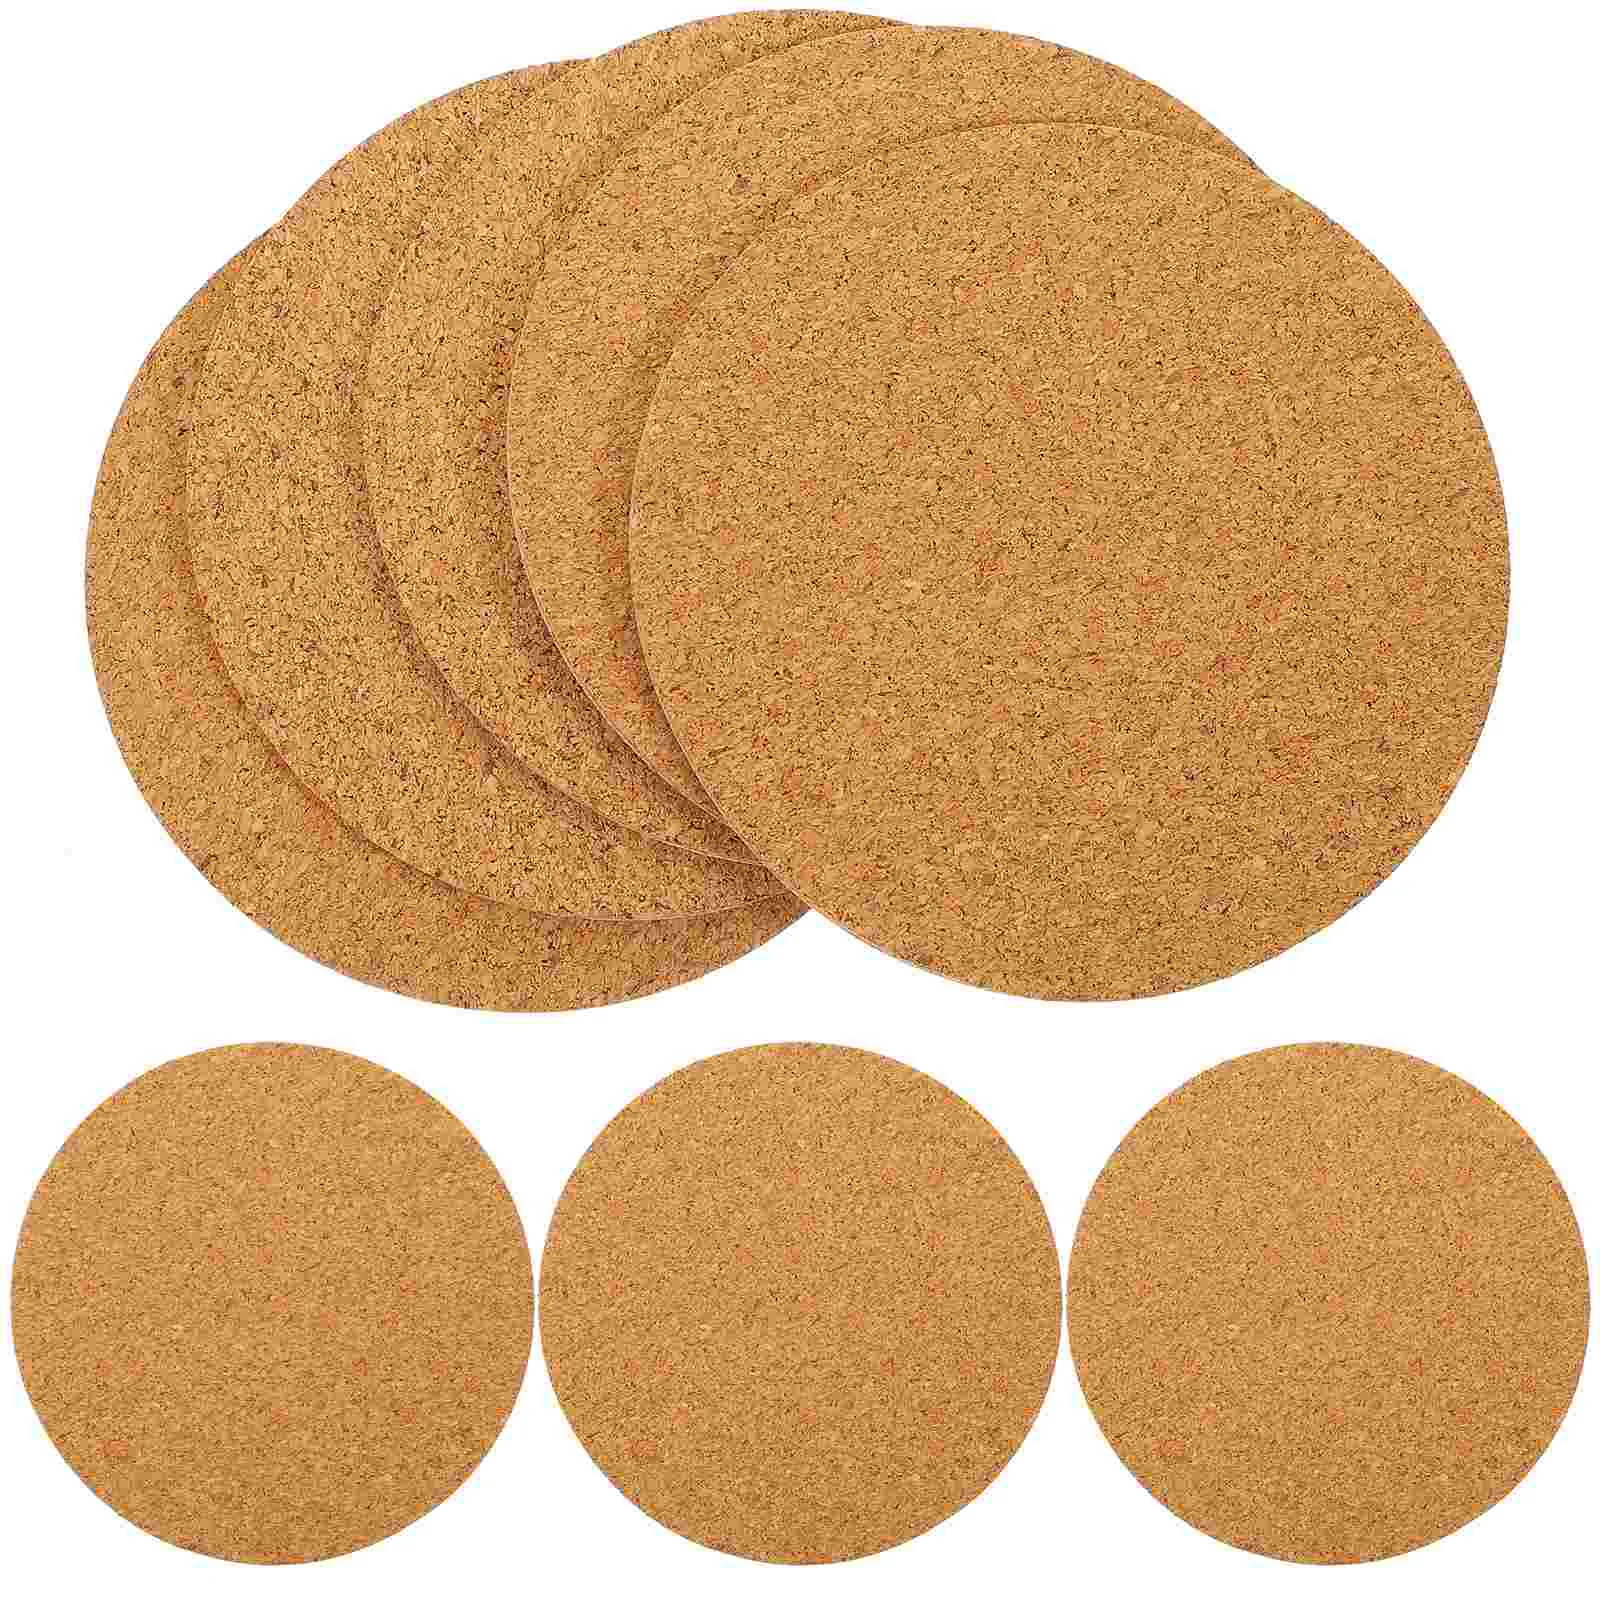 

Cork Coaster Adhesive Cup Coasters Self Pad Backing Drink Pads Mat Tiles Wood Tea Round Sticky Thick Board Table Wooden Bar